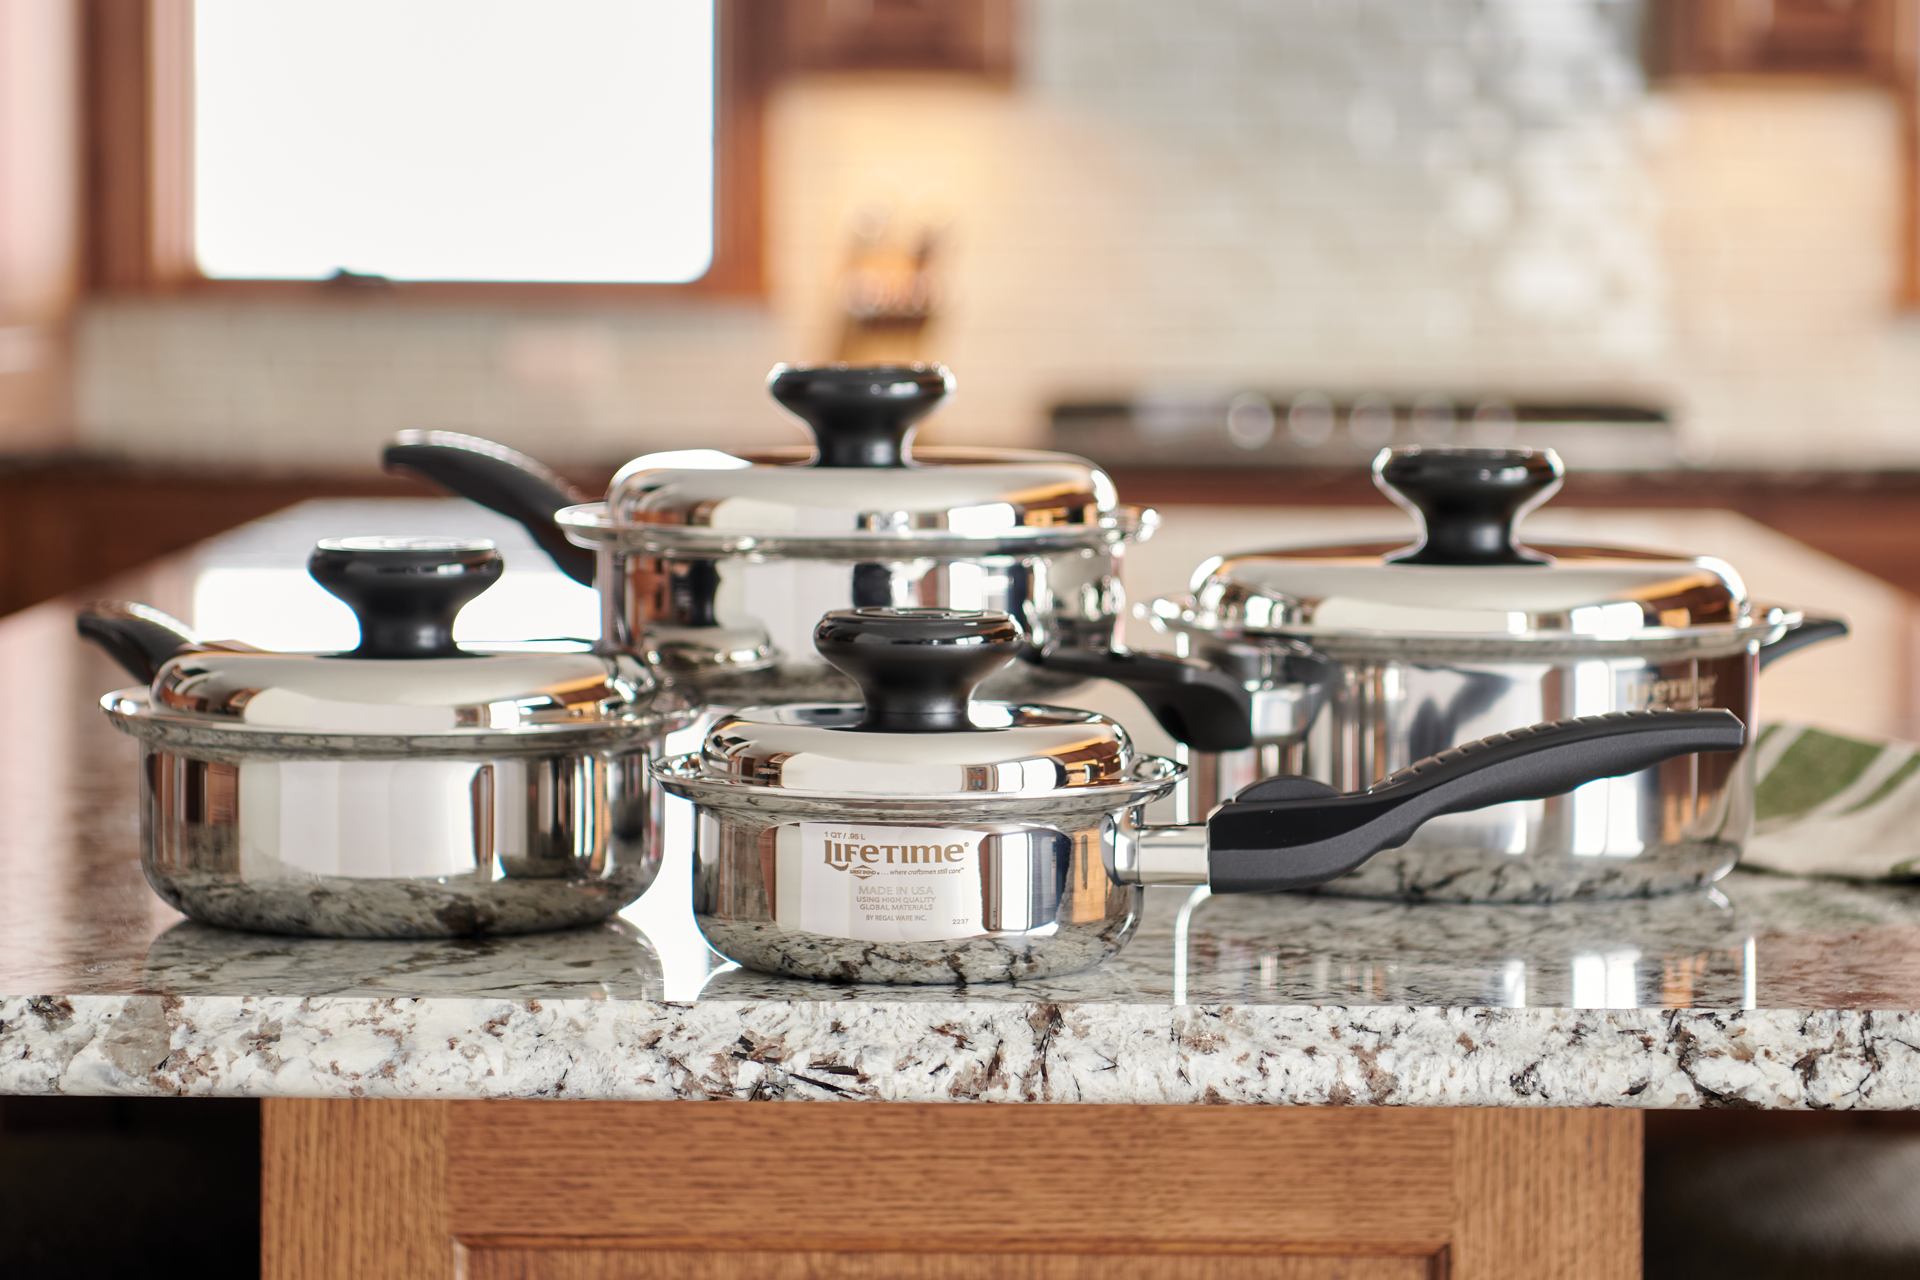 7-Ply 6 Pc. WATERLESS COOKWARE Set with Vented Lids 430 Magnetic and T304  Stainless Steel.